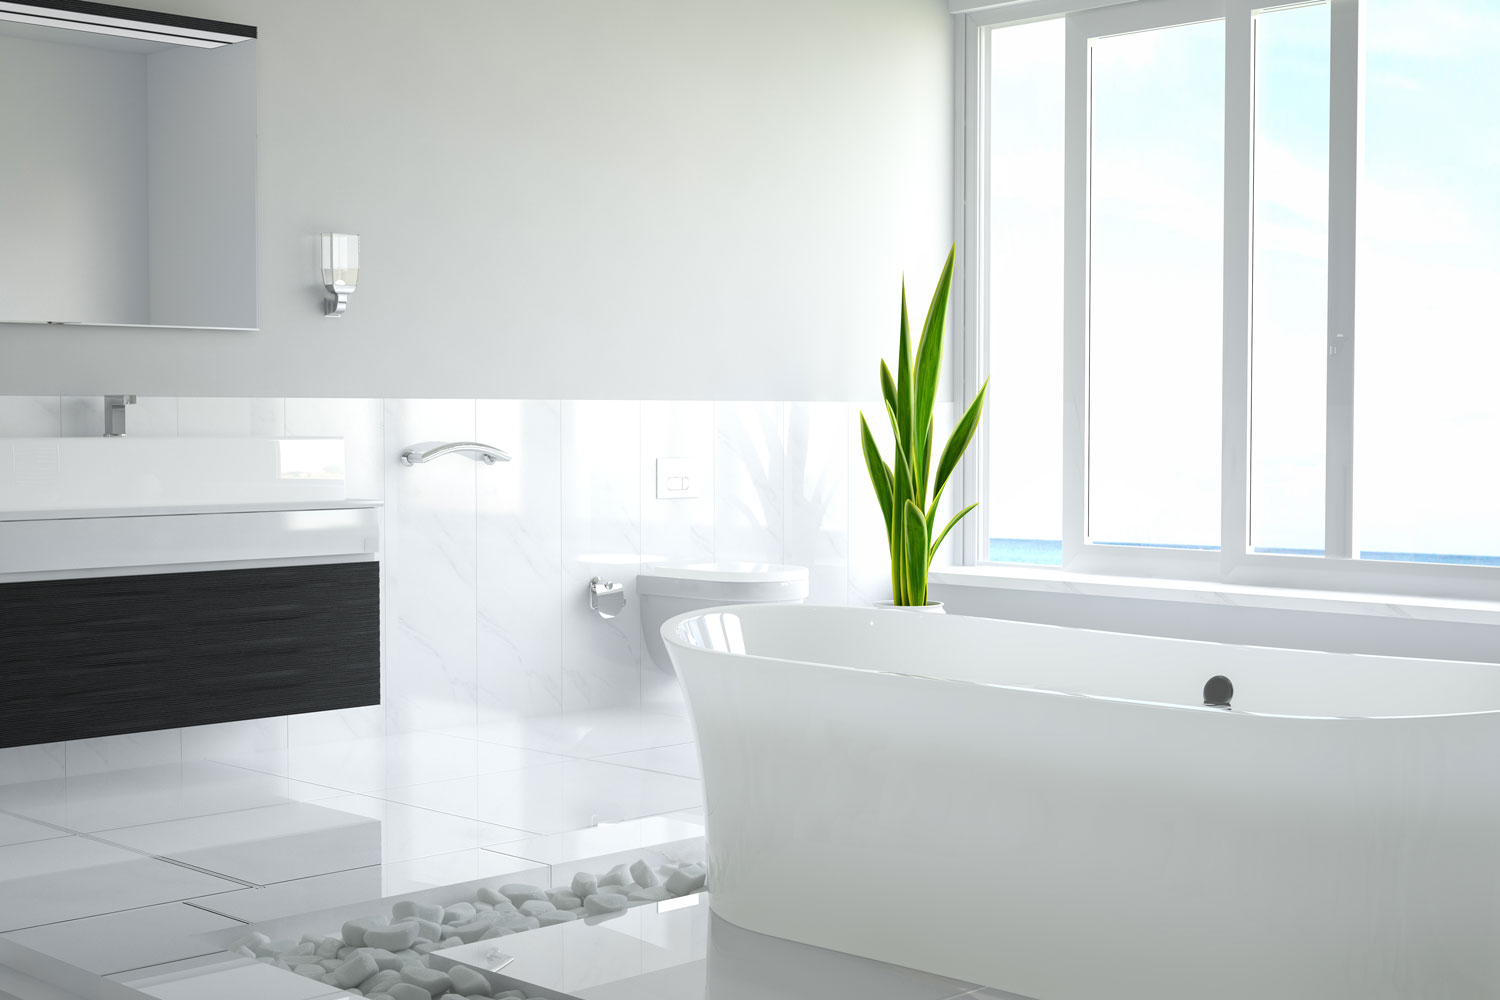 A bright and white designed bathroom with pebbles surrounding the bathtub area and a snake plant on the side